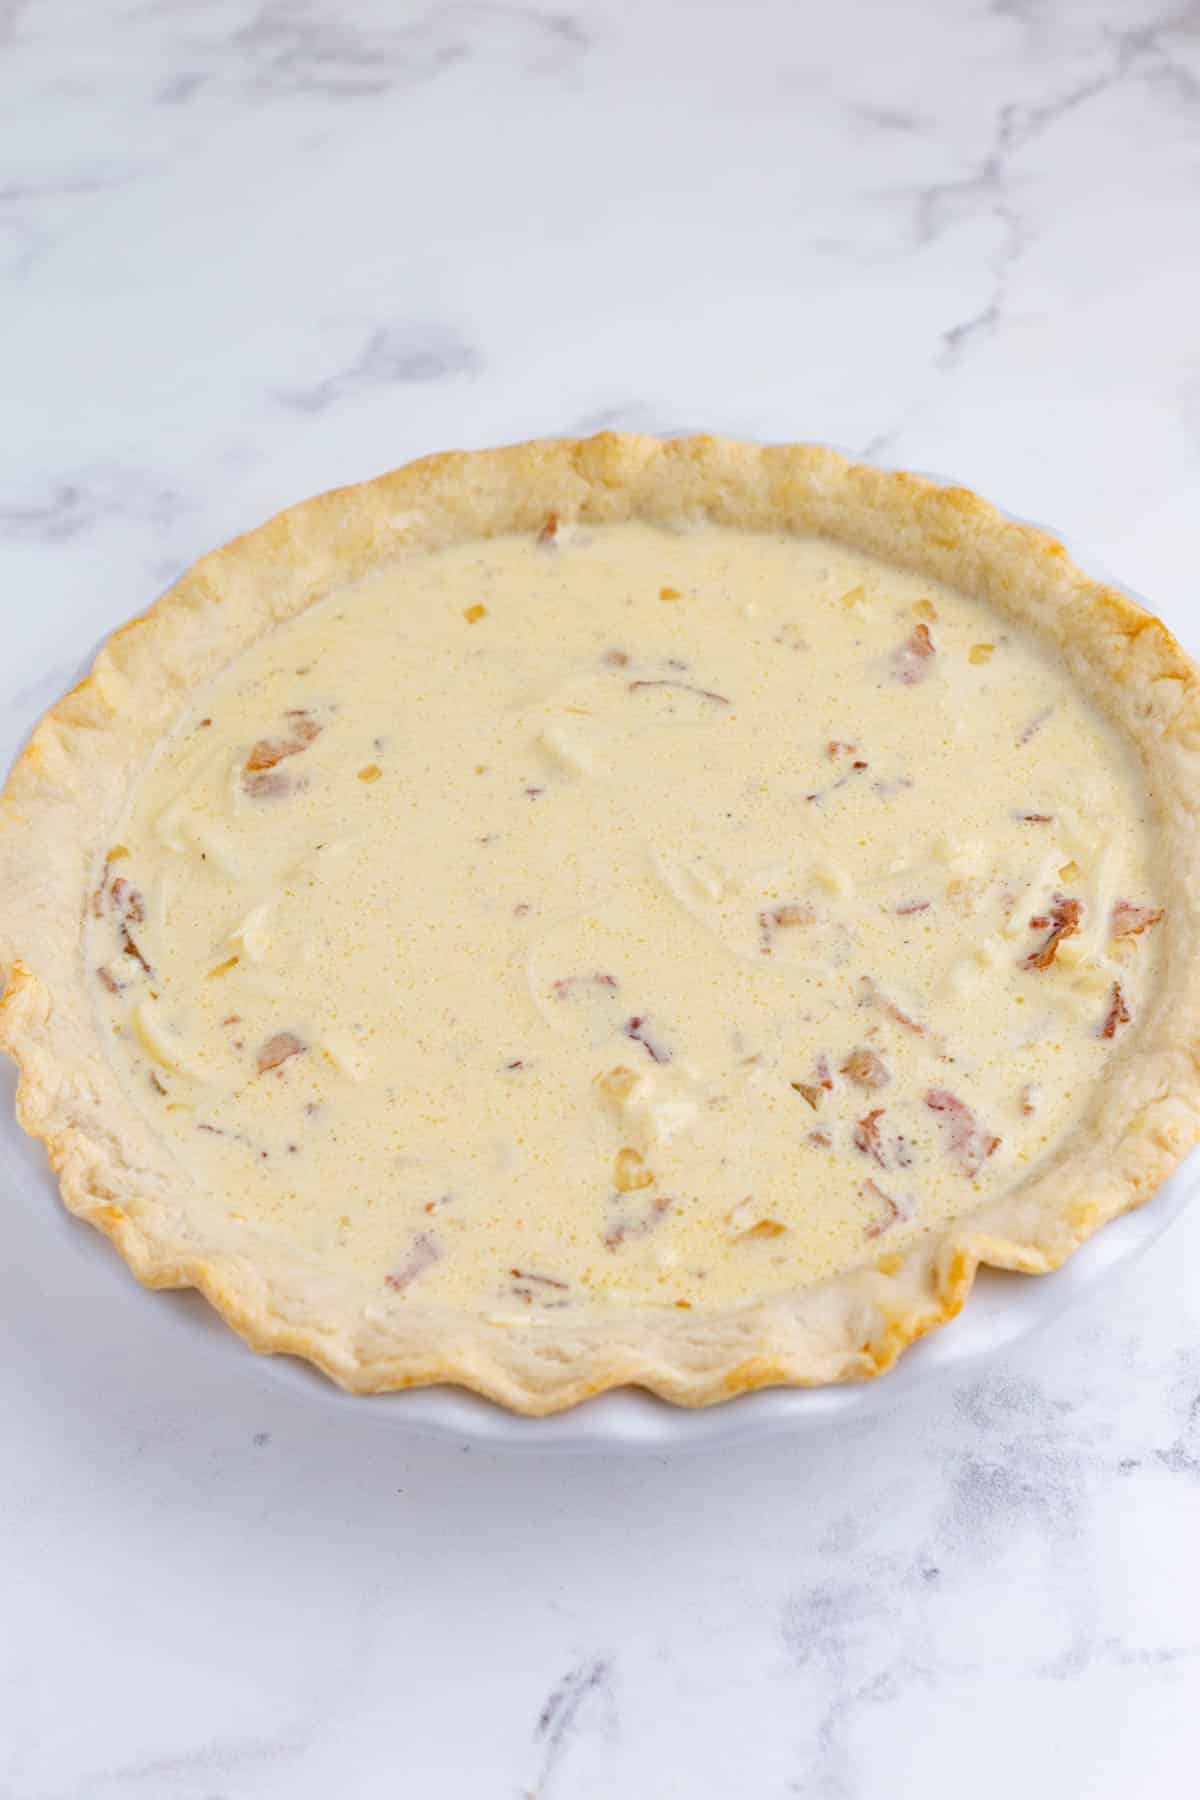 A raw quiche is ready to bake.